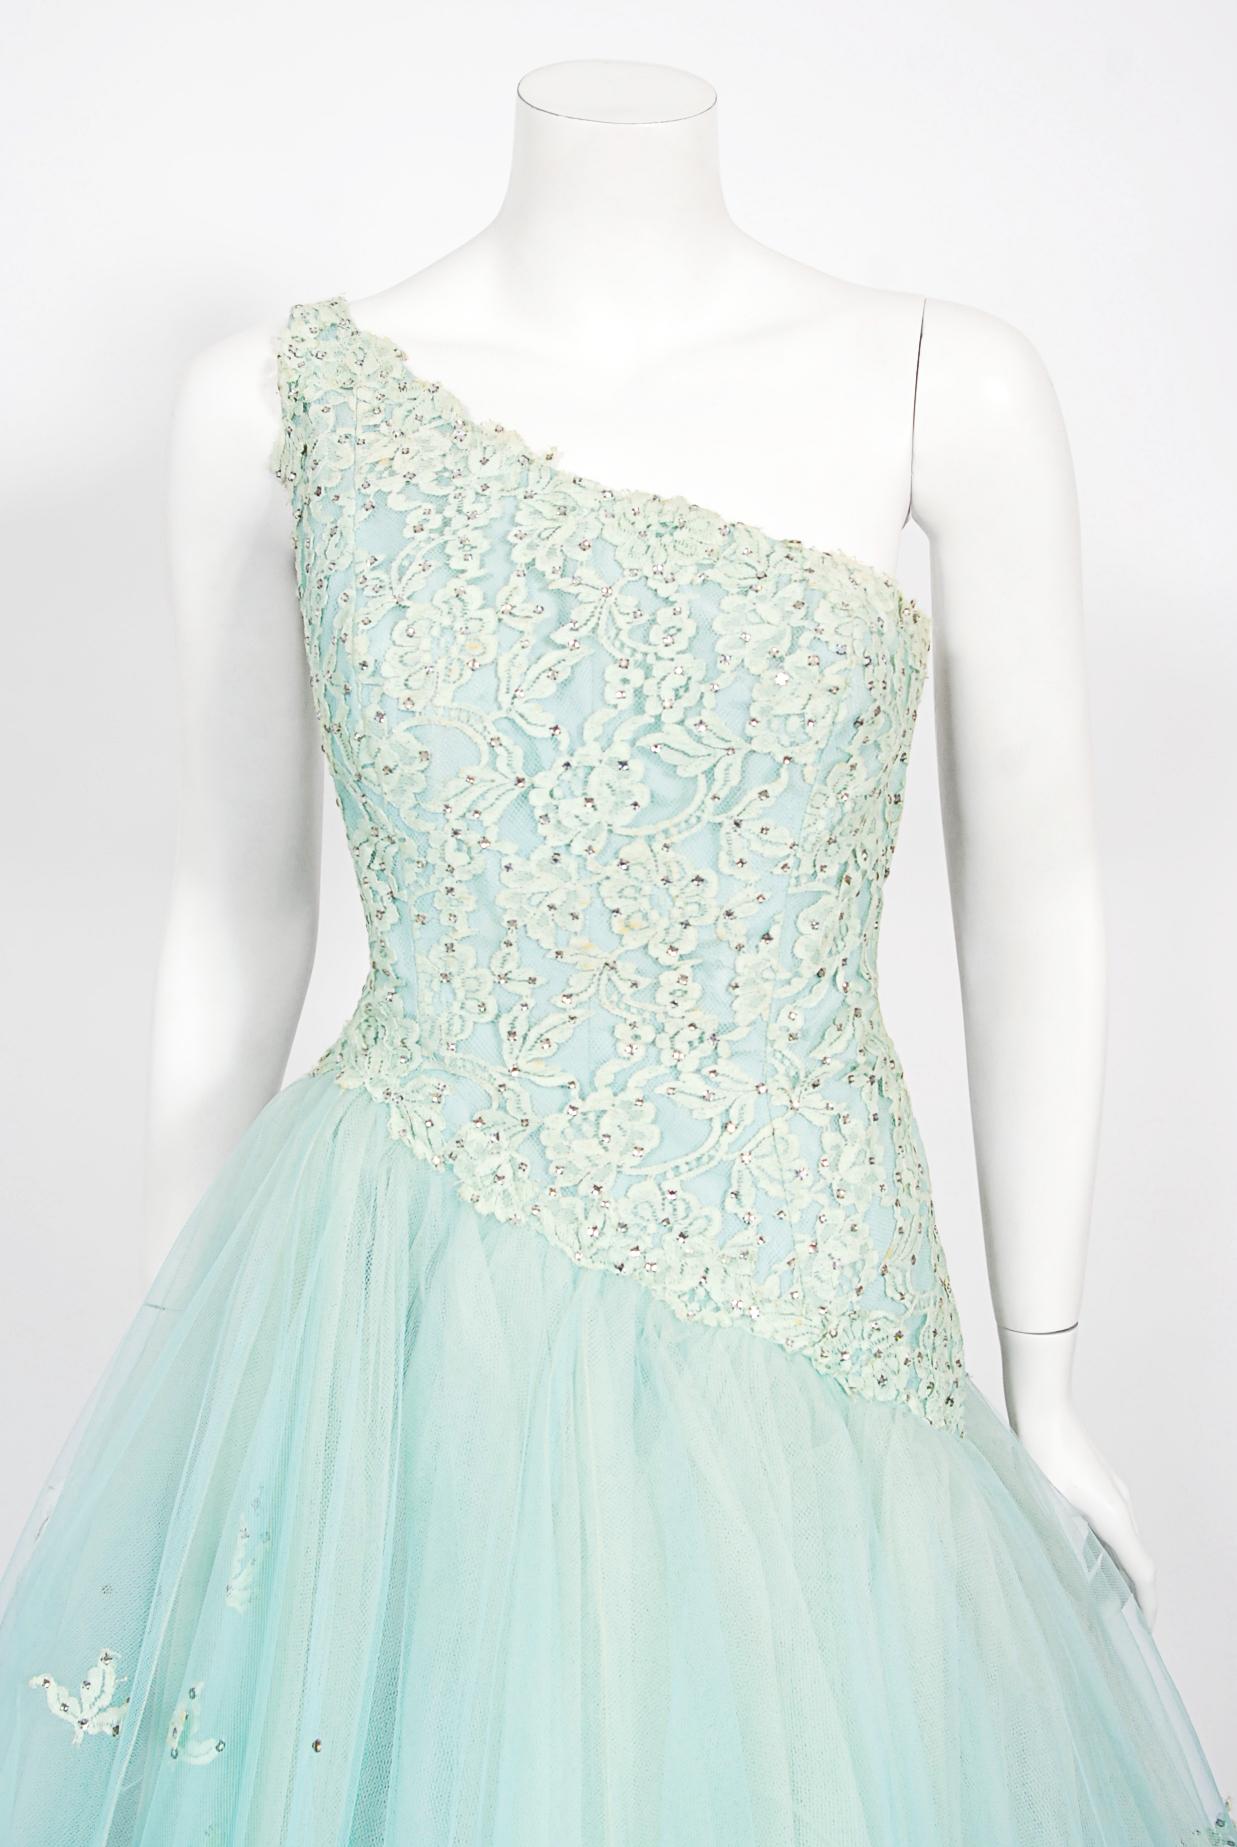 An absolutely gorgeous early 1950's sparkling seafoam blue rhinestone lace and sheer tulle ballerina-length dress by Edith Small. Although originally from Chicago, in 1945 Edith Small opened her clothing house in Los Angeles, California. Small was